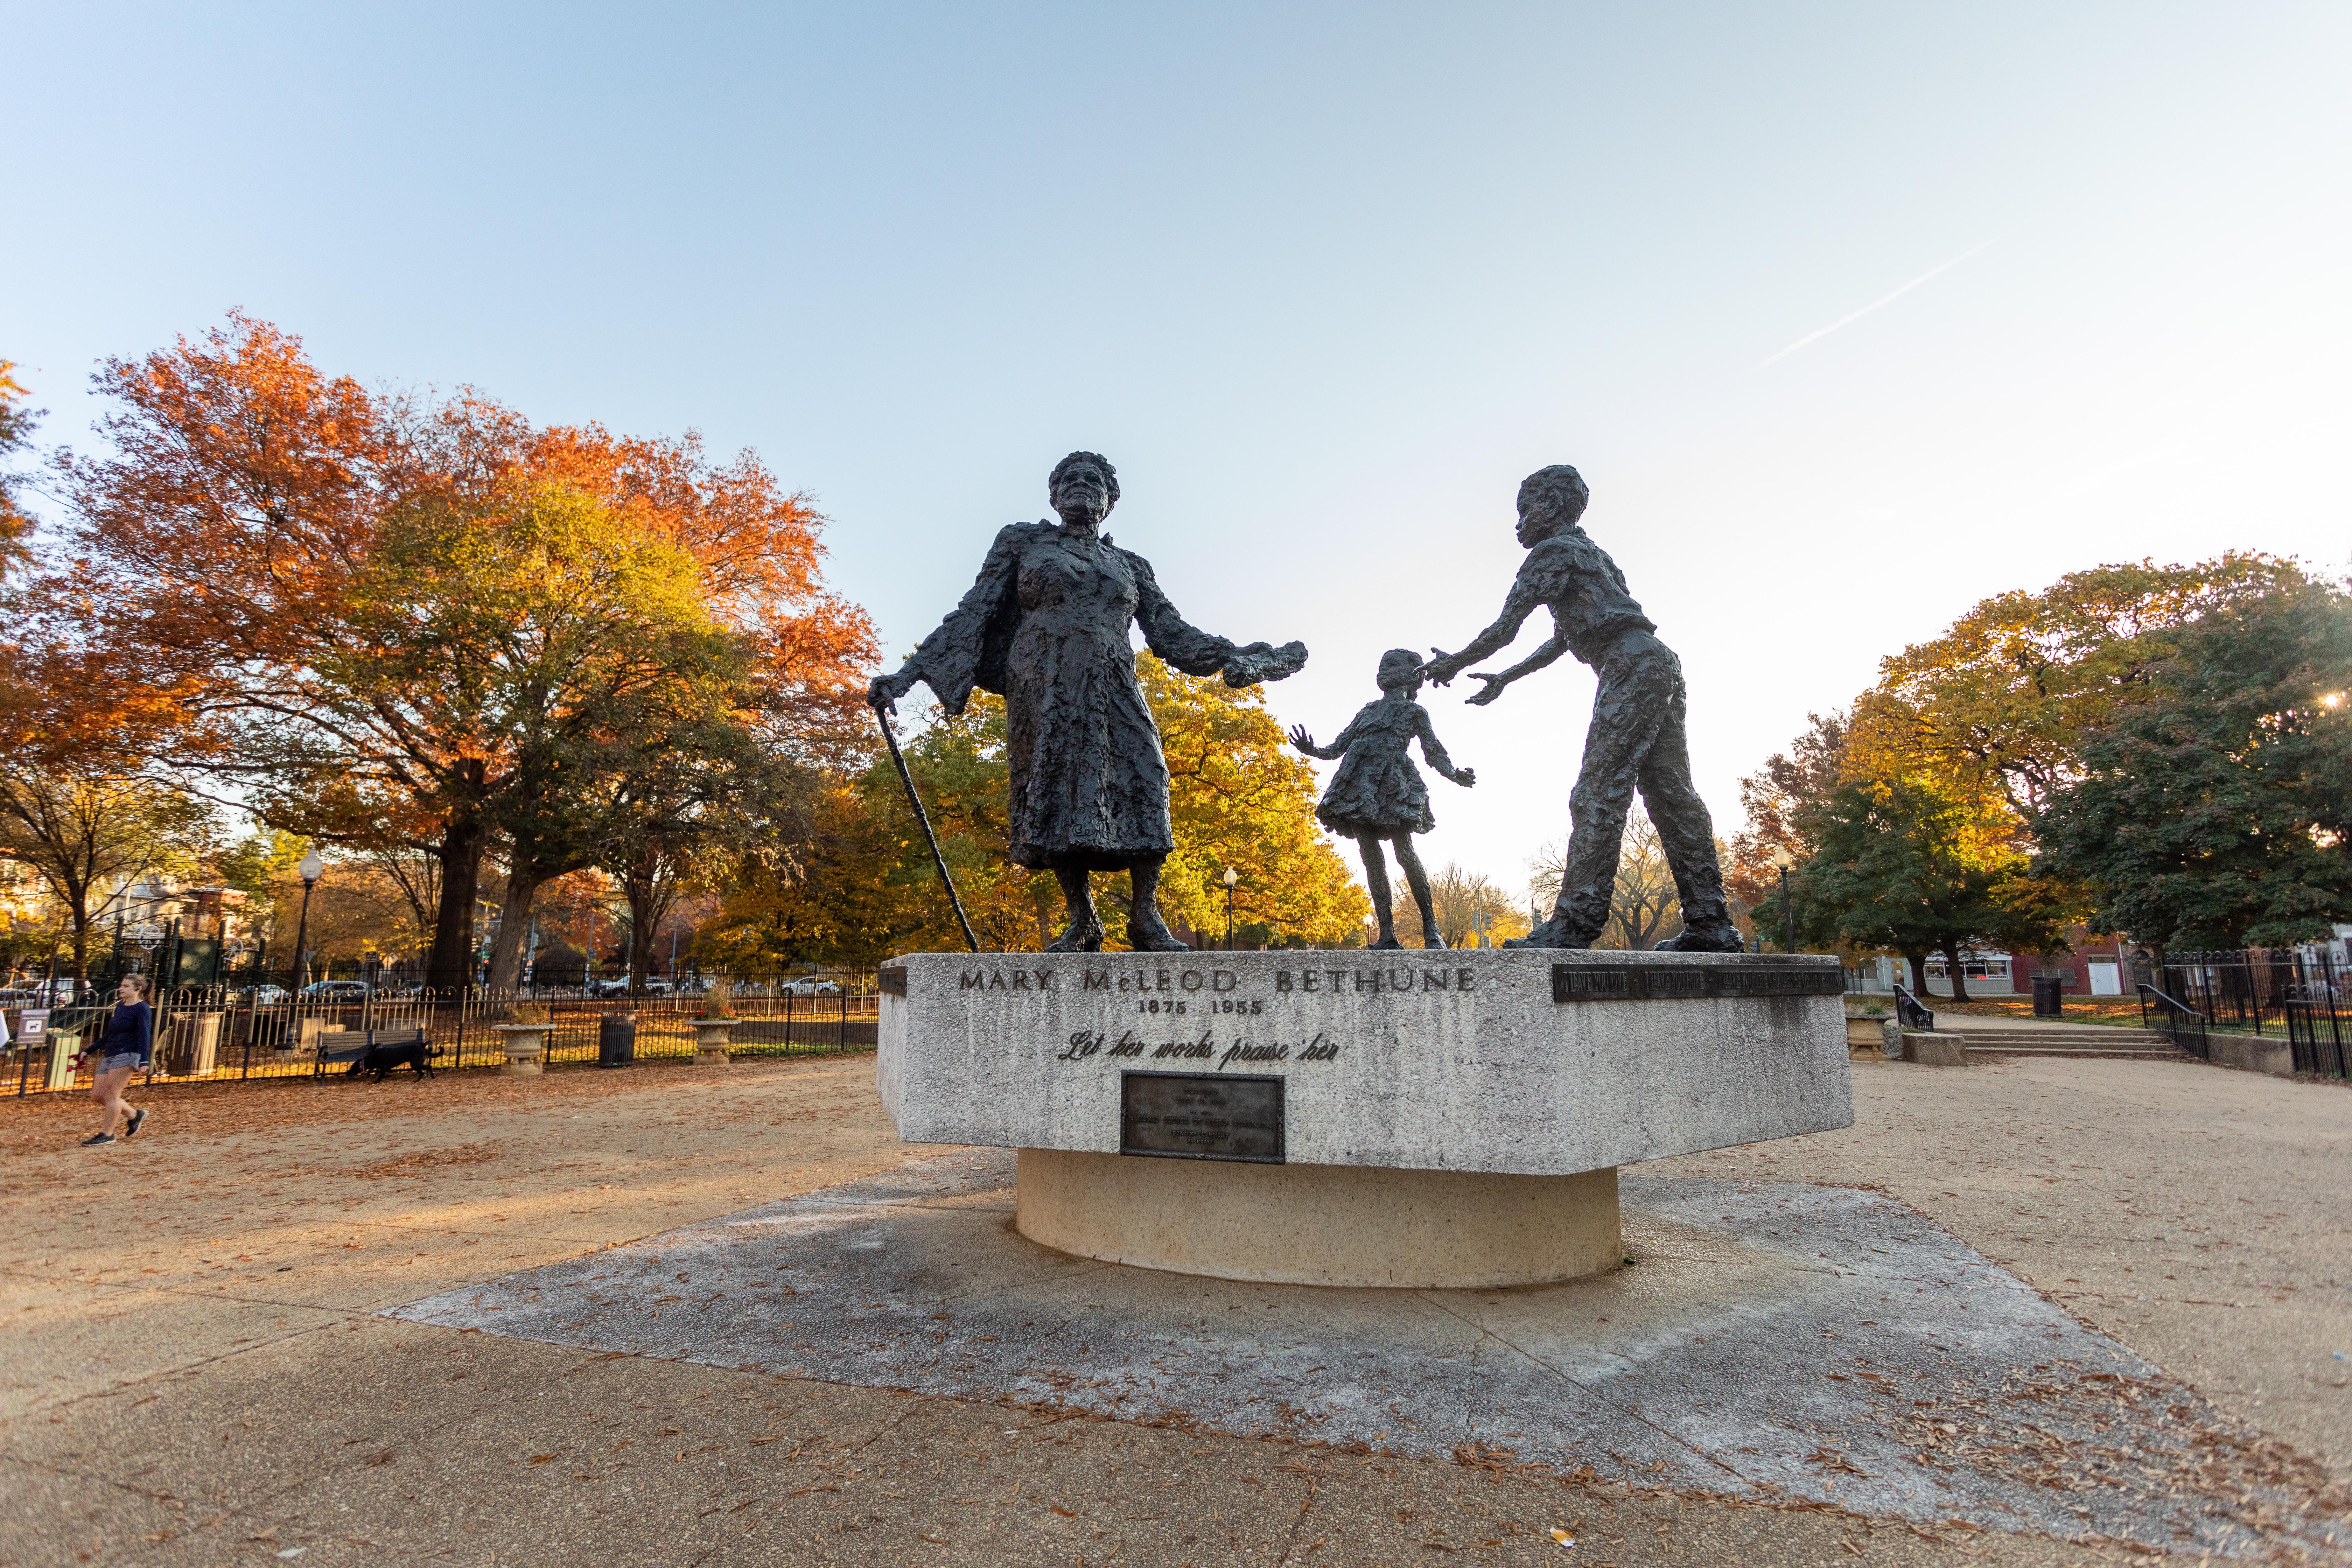 Bronze statue of Mary McLeod Bethune and a boy and girl.